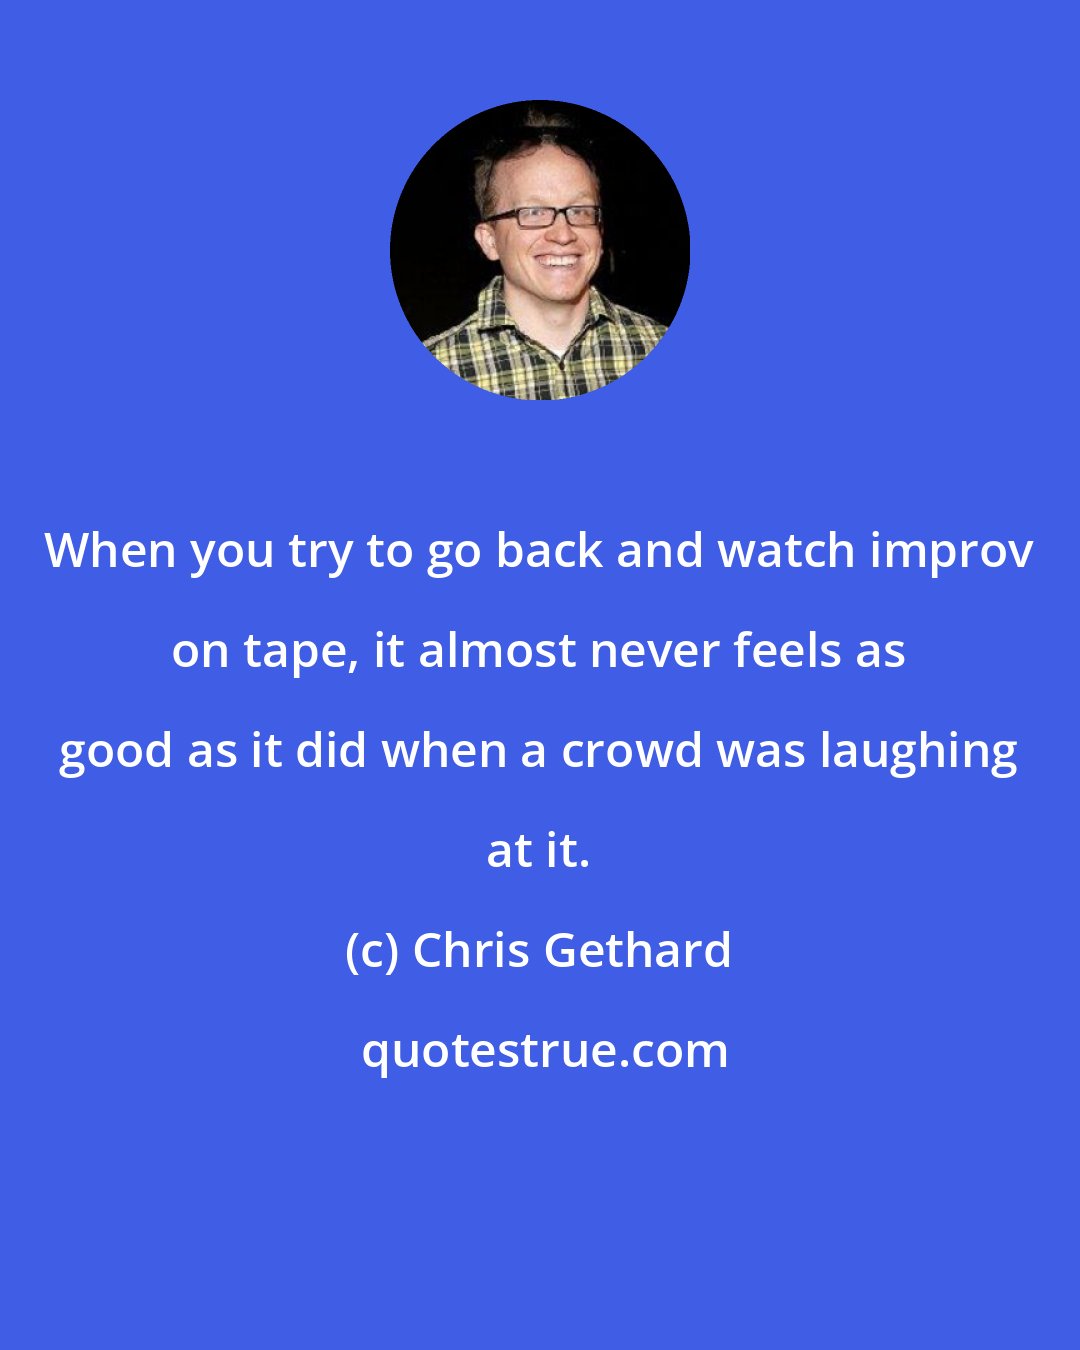 Chris Gethard: When you try to go back and watch improv on tape, it almost never feels as good as it did when a crowd was laughing at it.